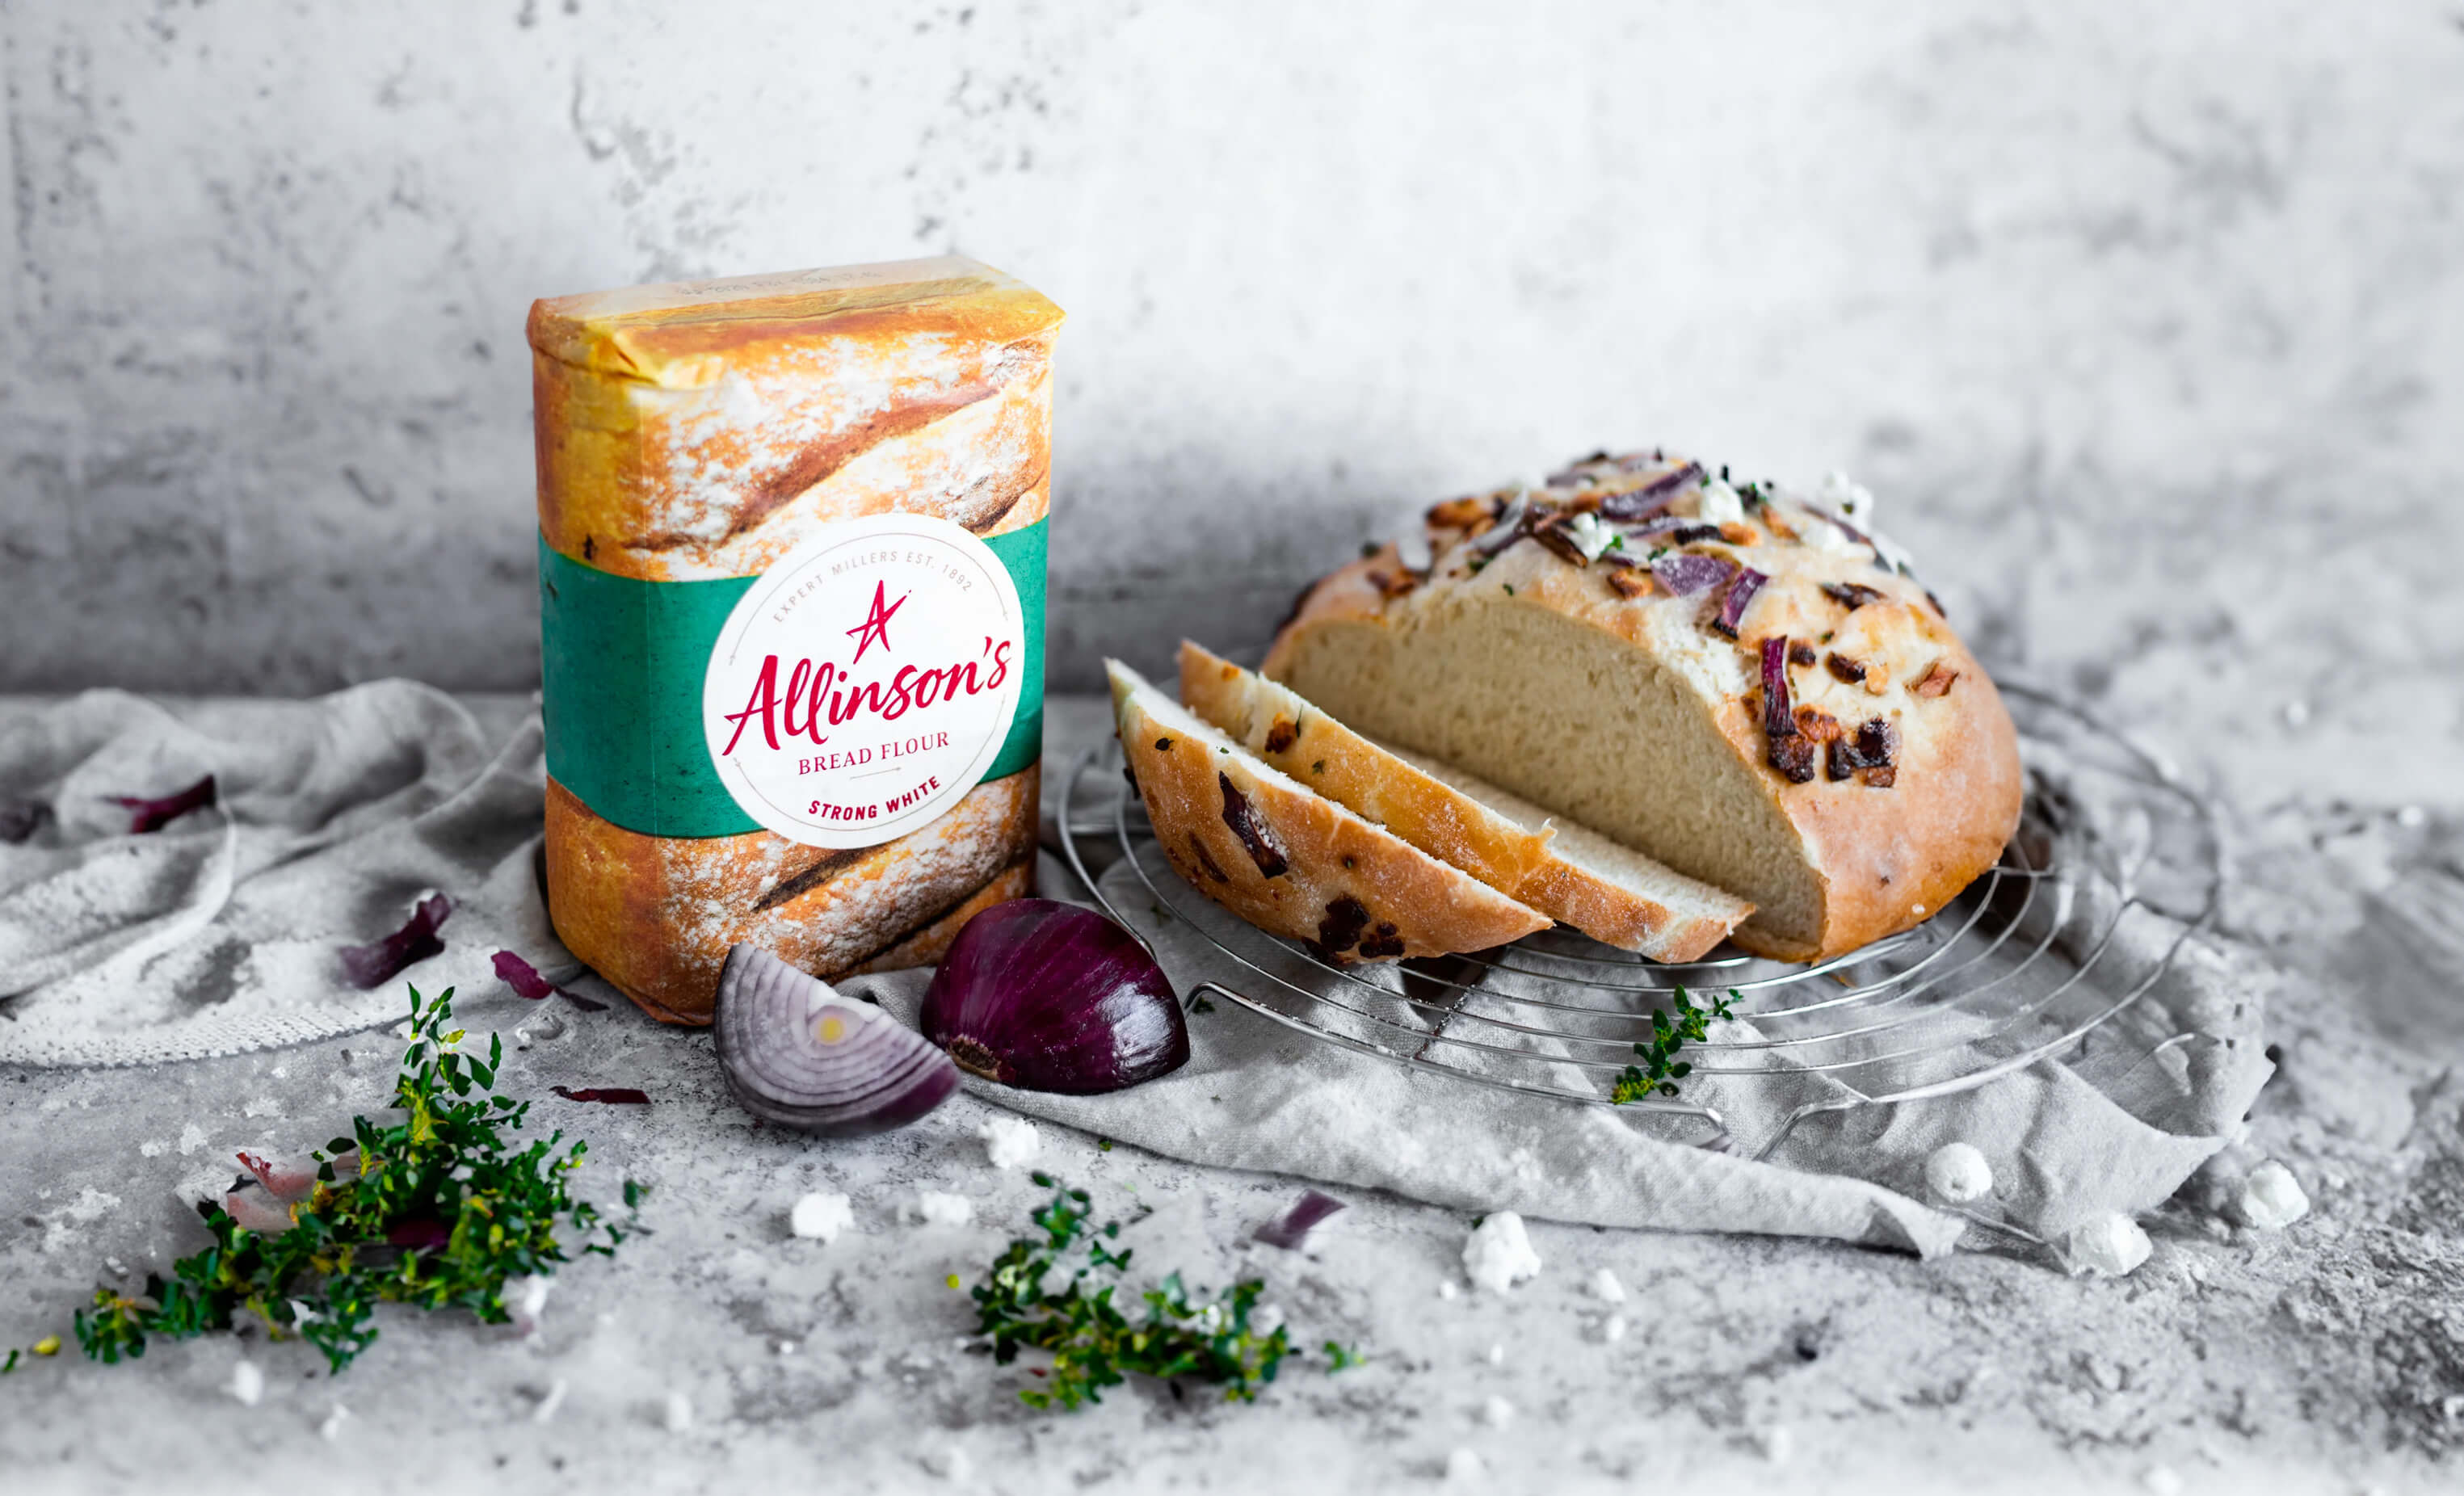 A pack of Allinson's Strong White Bread Flour next to a sliced freshly baked red onion and goats cheese loaf.